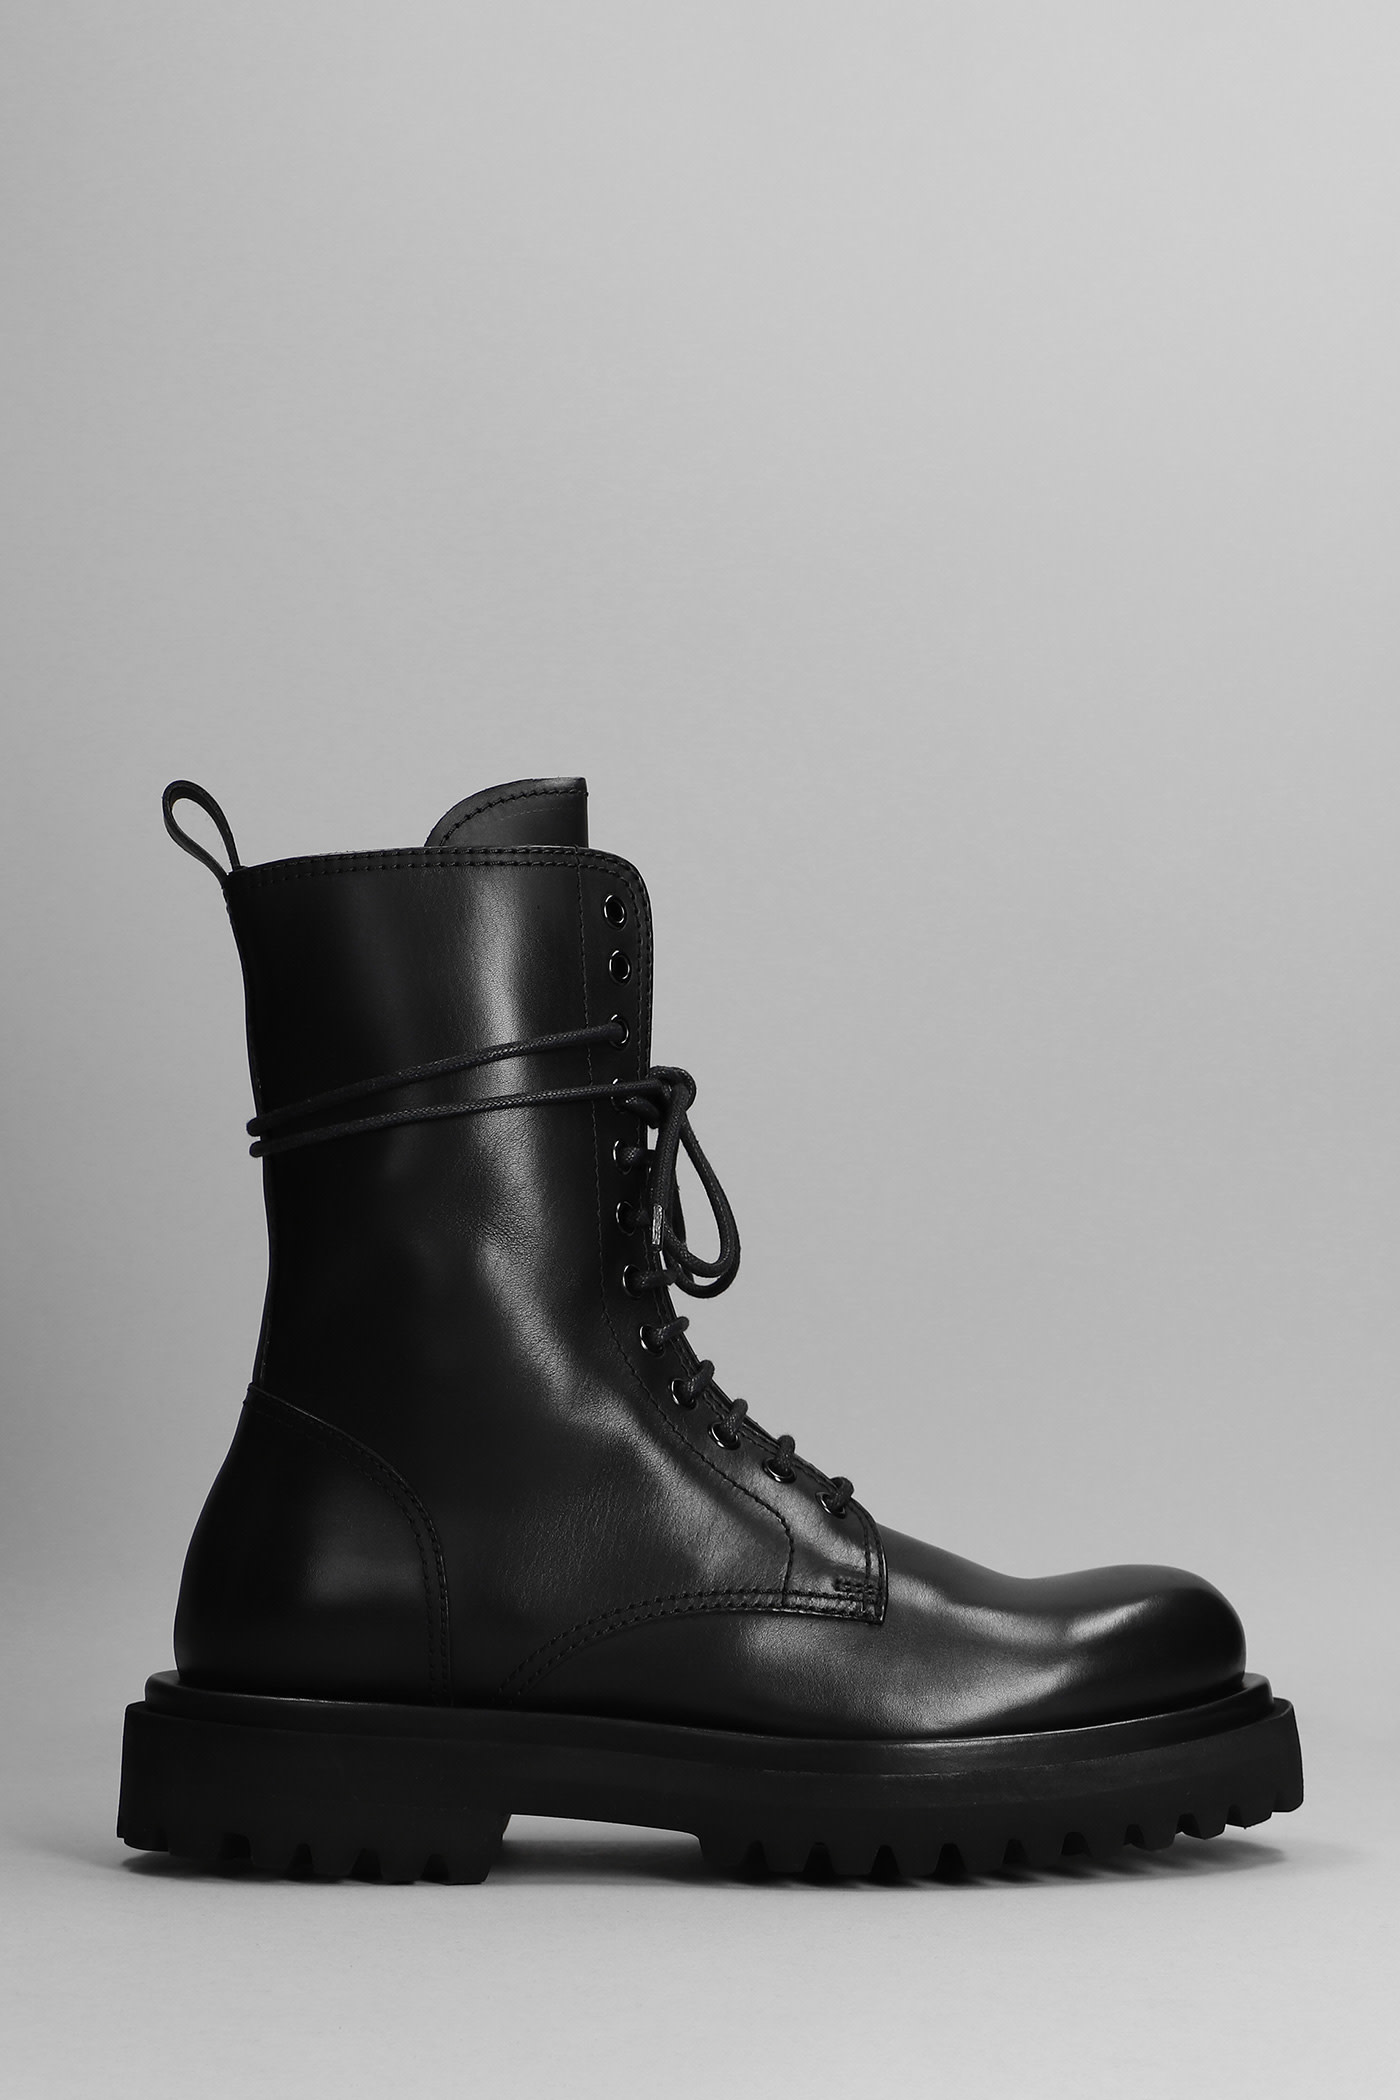 Officine Creative Wisal 018 Combat Boots In Black Leather